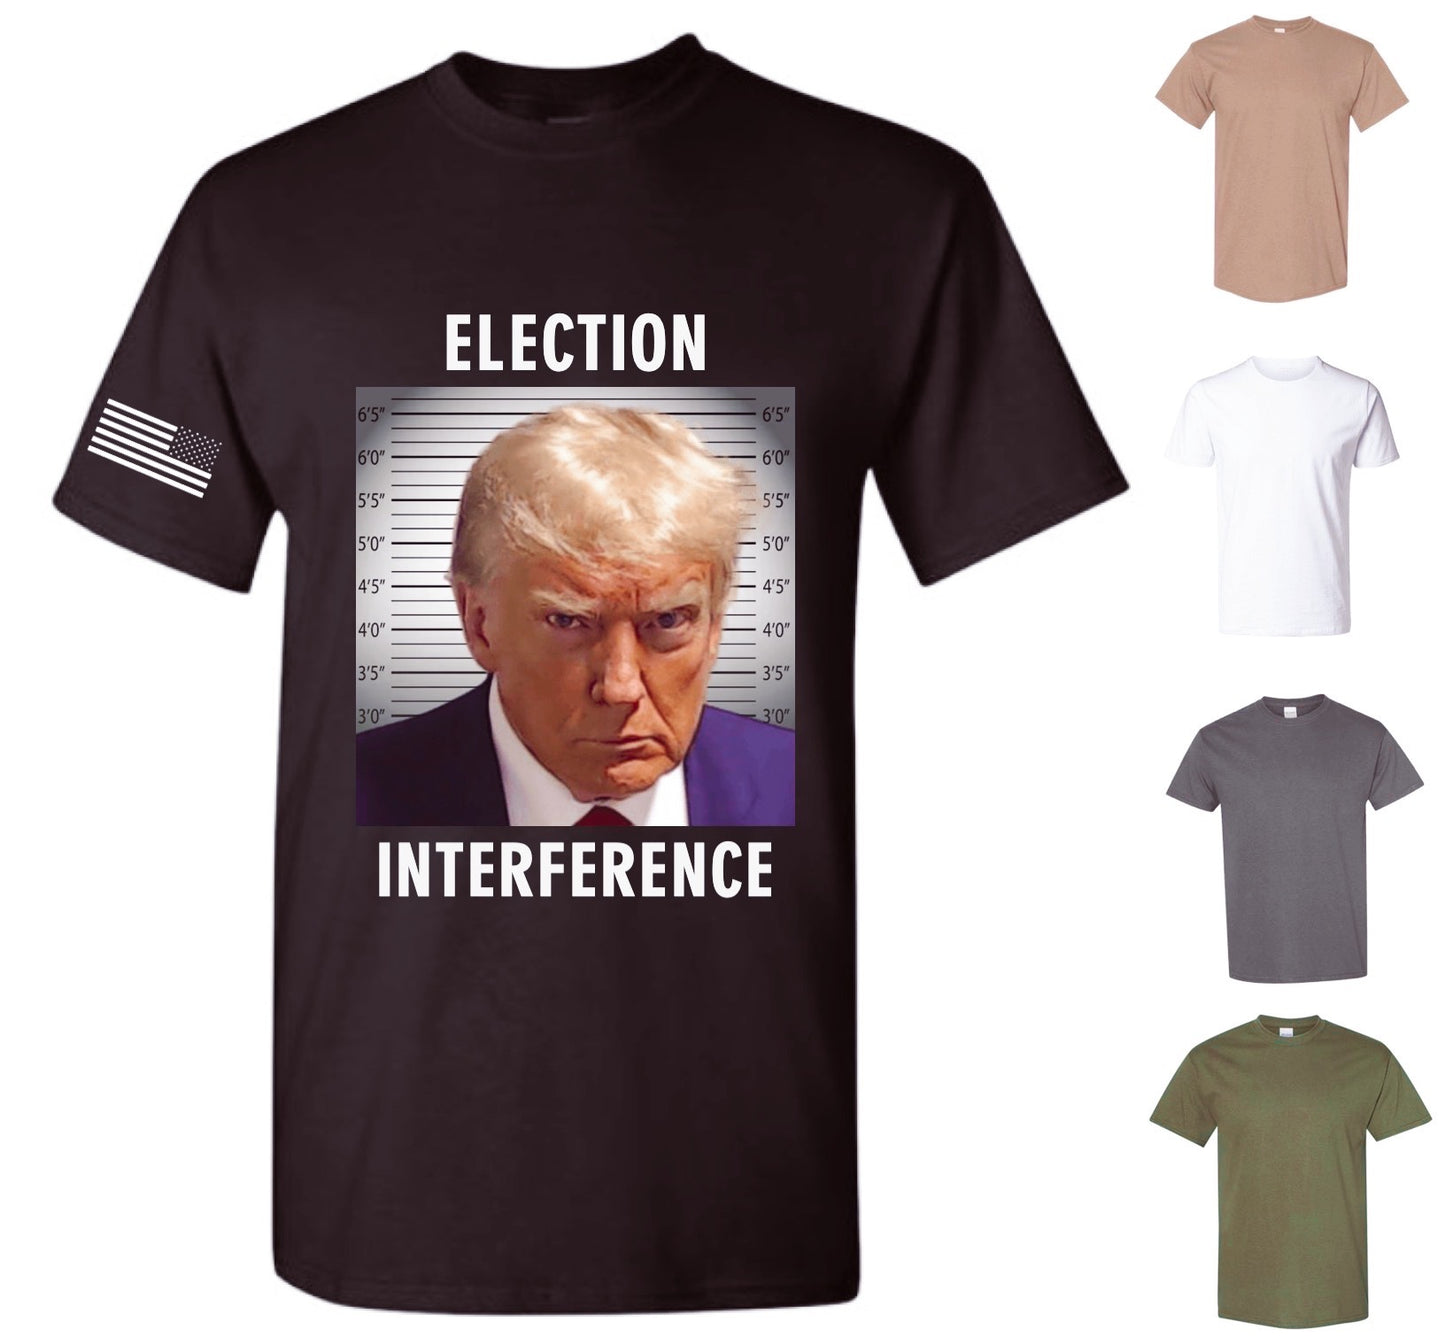 Election Interference T-Shirt — Free Shipping!